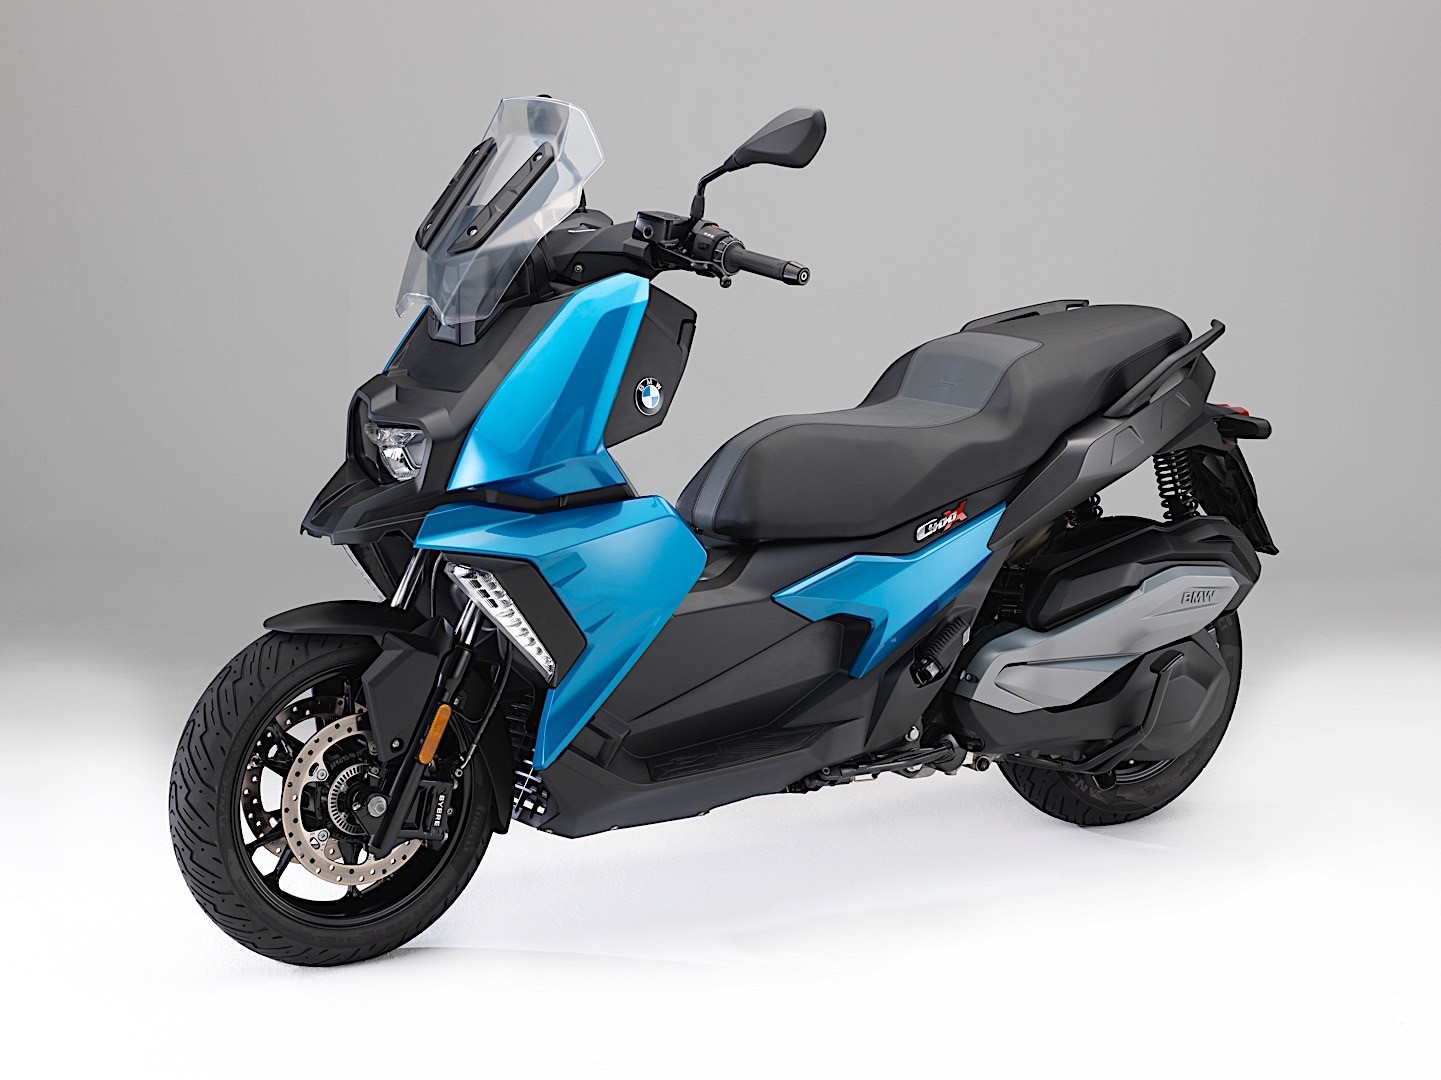 BMW Motorrad Launches Its First Sub 600CC Scooter At EICMA 